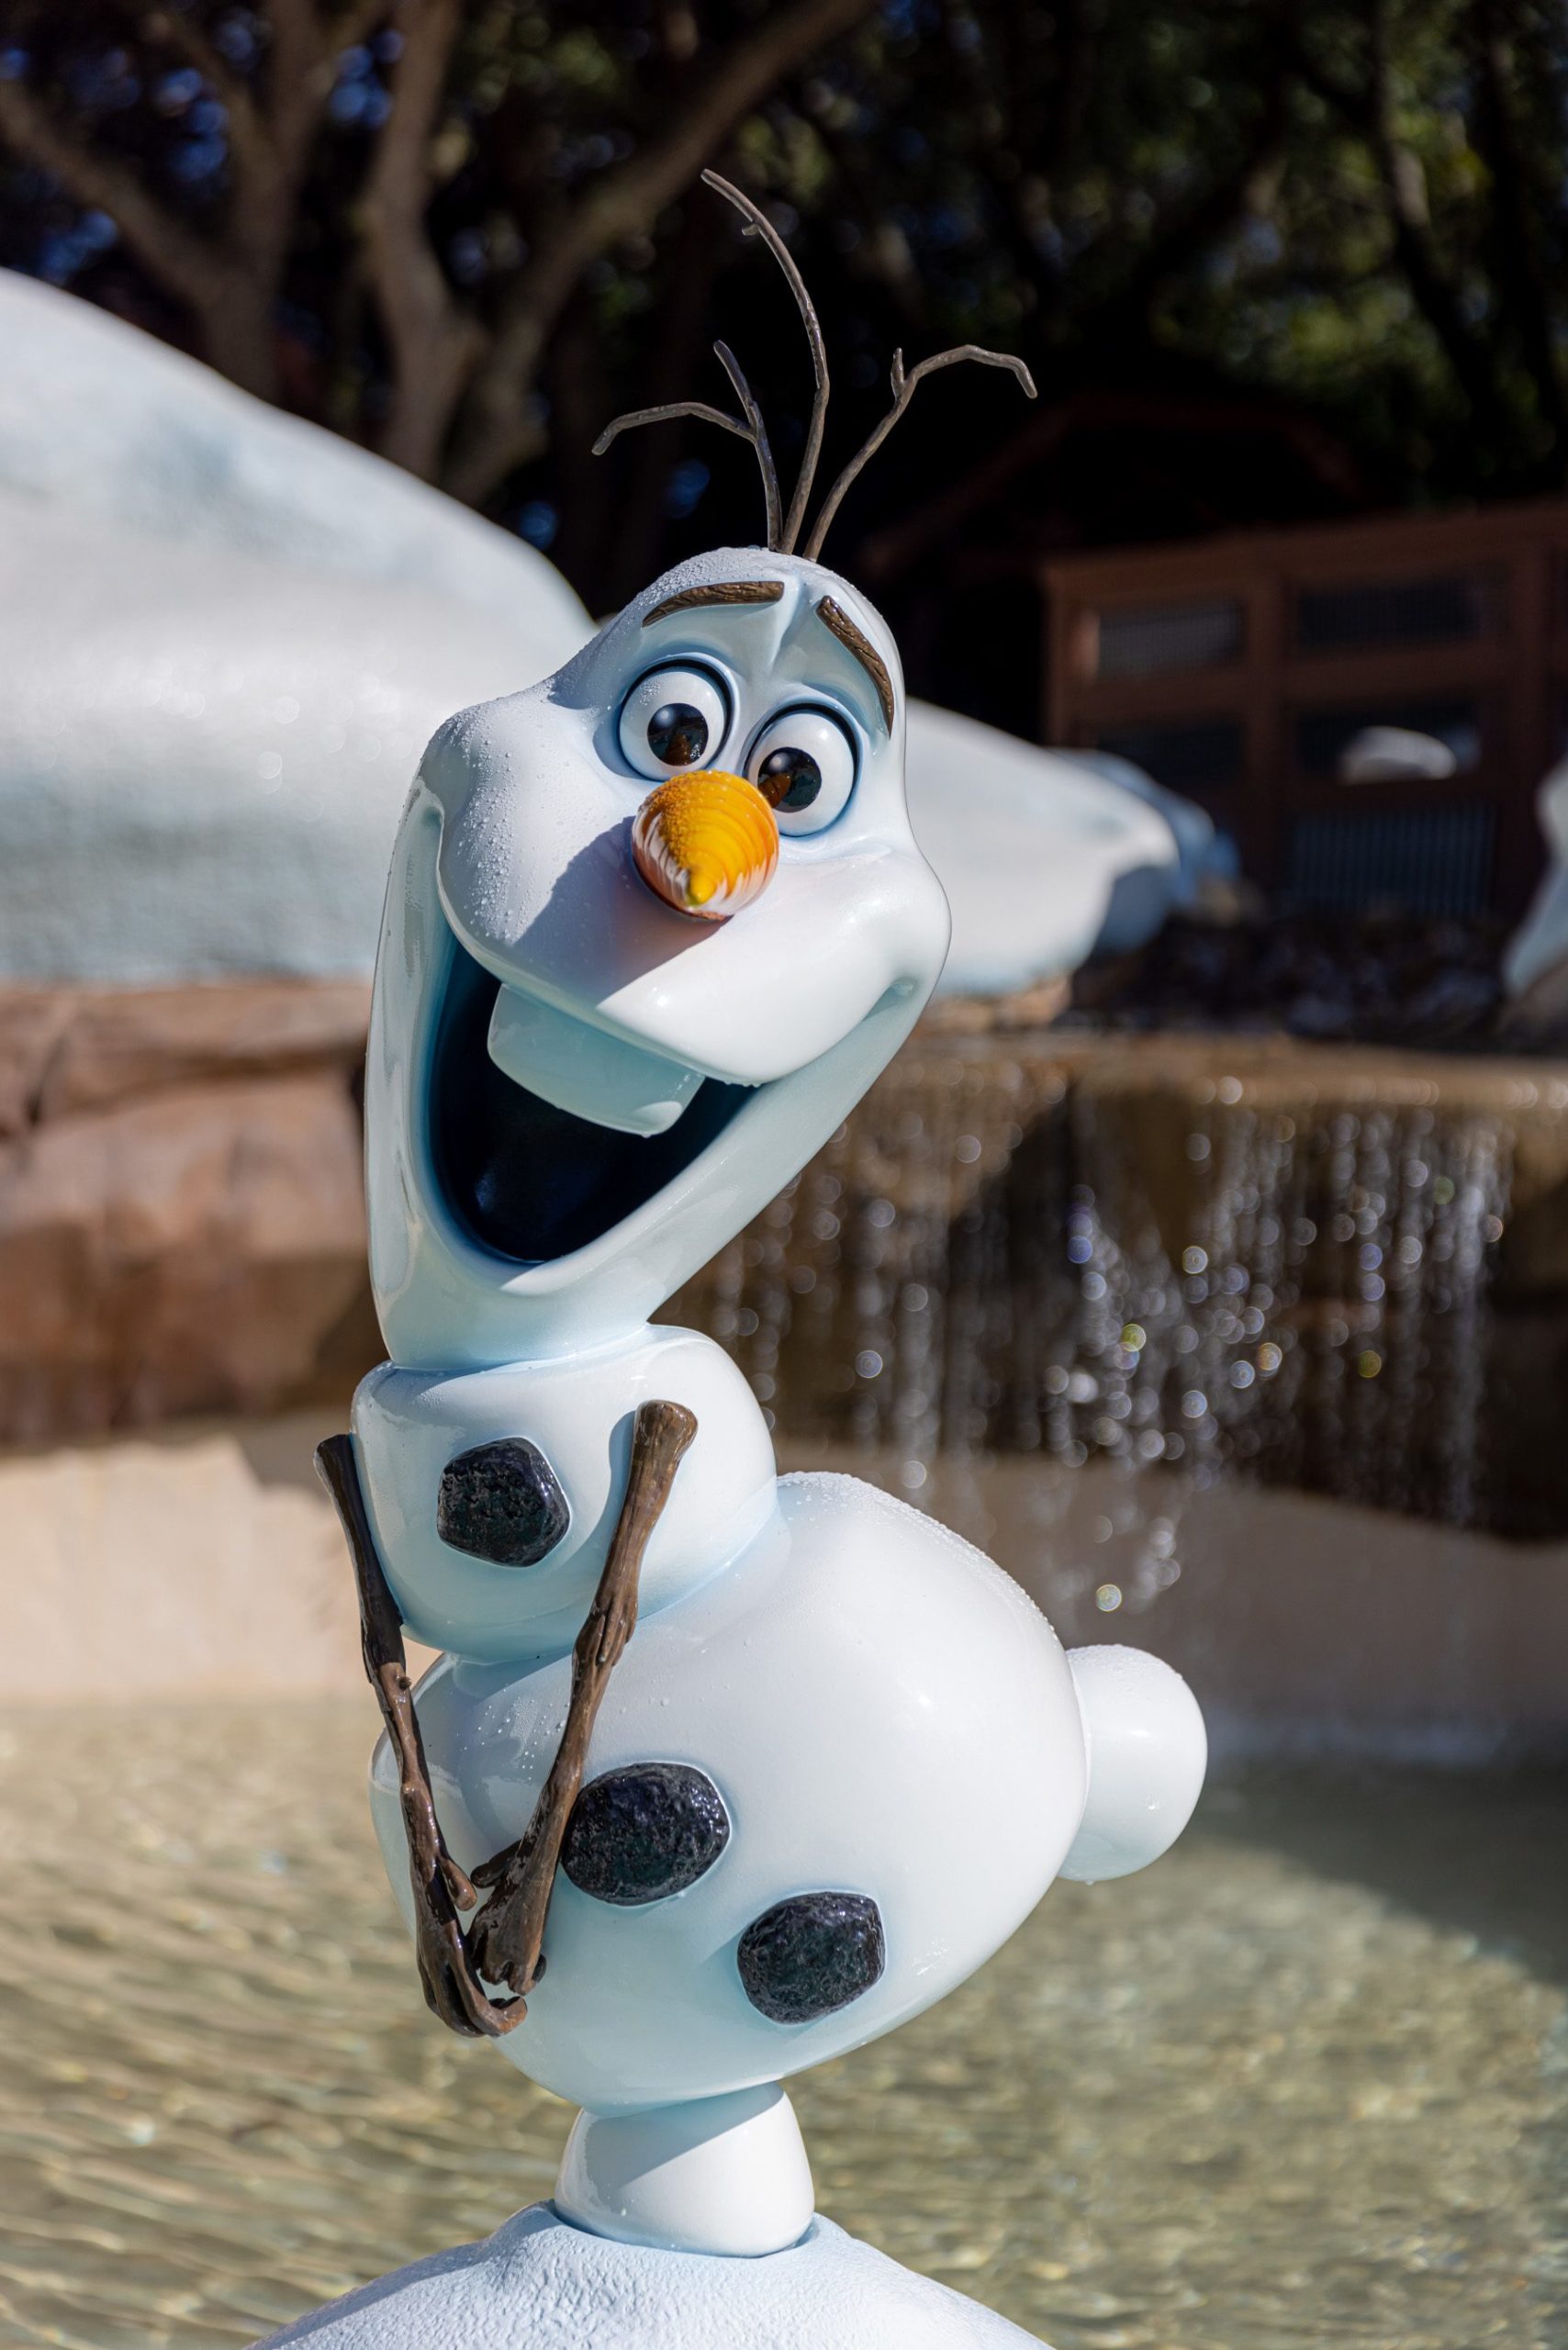 https://mickeyblog.com/2022/10/25/blizzard-beach-reopening-with-new-frozen-theme-next-month/